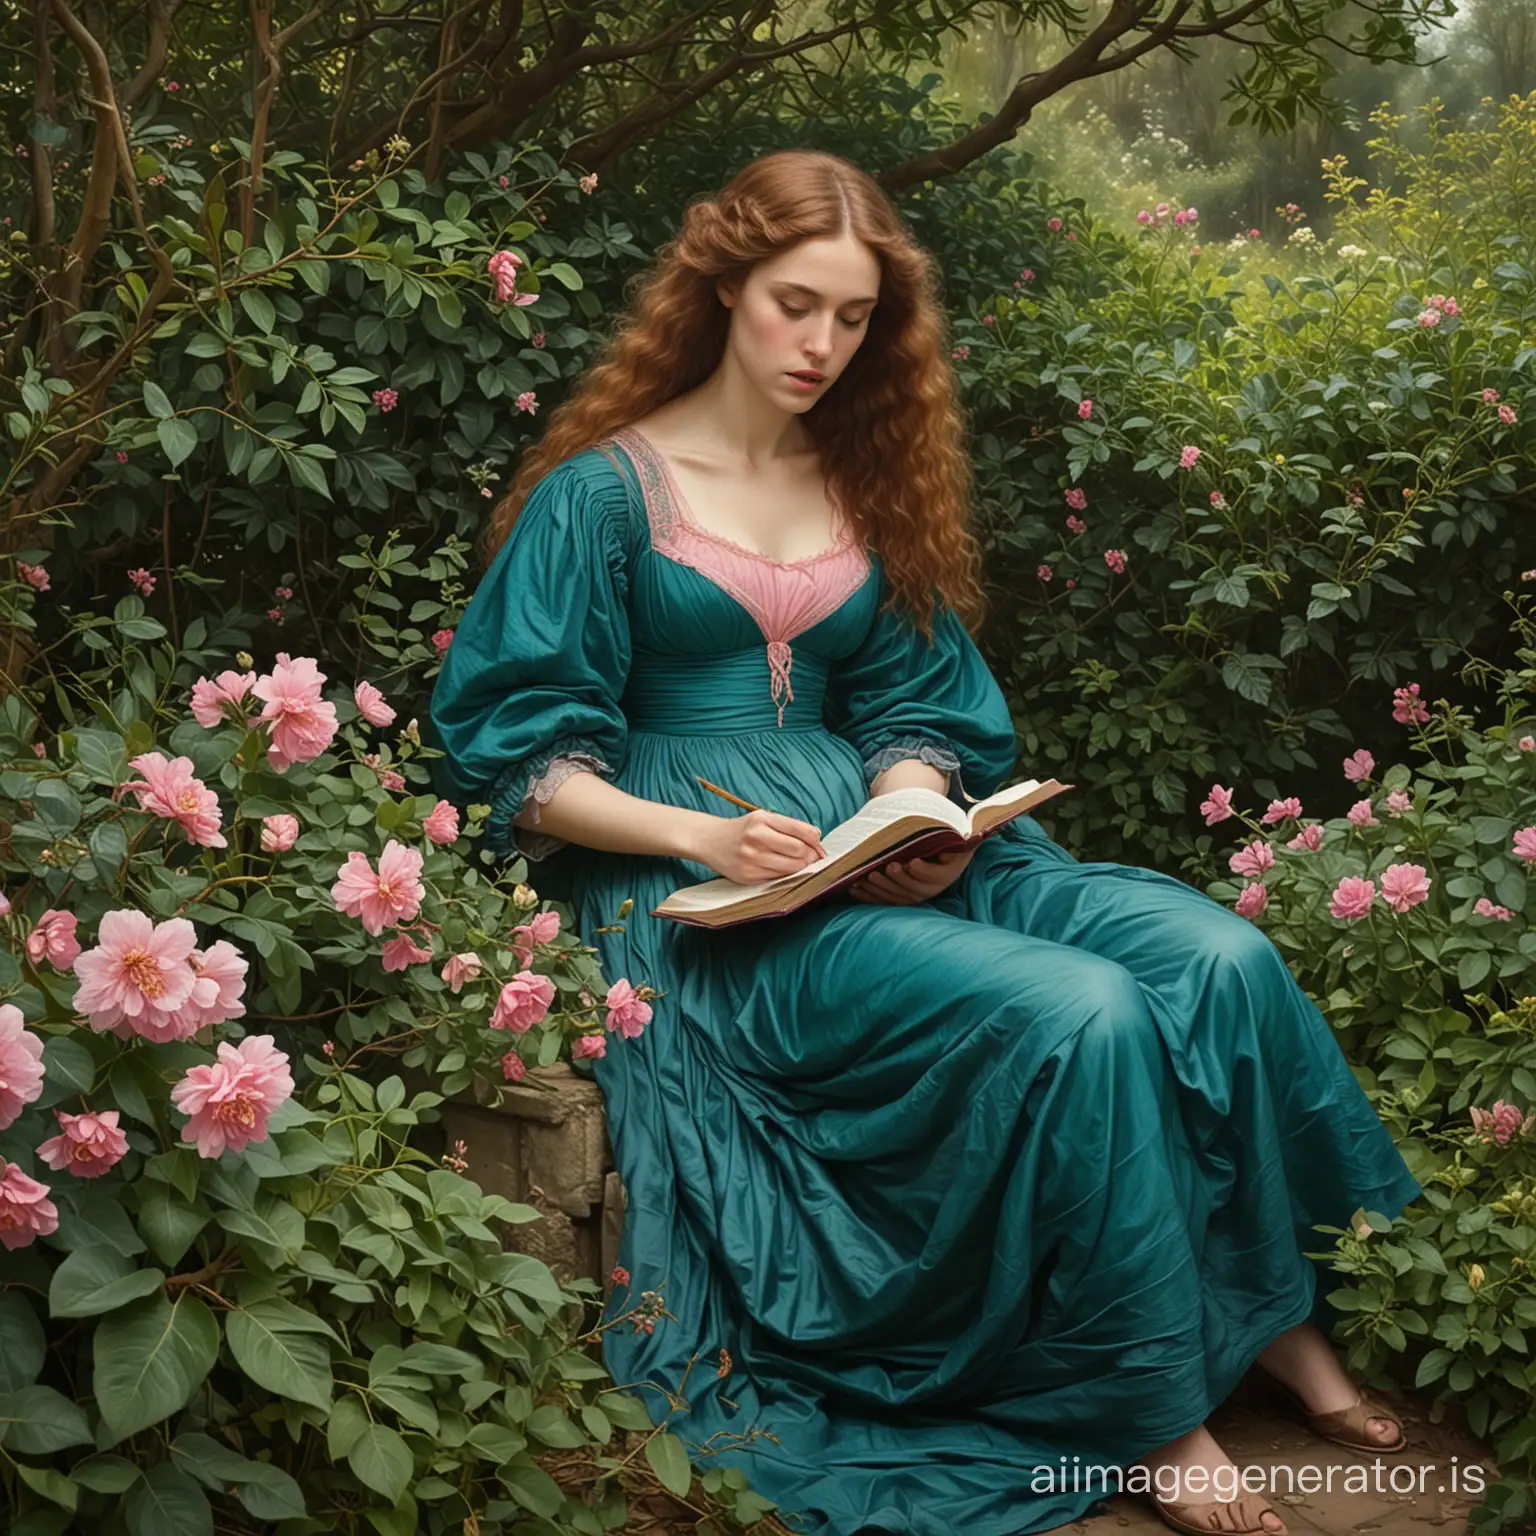 A masterpiece, a painting of the Pre-Raphaelites, a young woman with dark hair sitting in the hedges of hederas, full-length, diagonal angle, a dark turquoise dress, an open book, a not fully bloomed pink flower in hand, through the branches of plants we see the exit from the thickets, sunbeams breaking through from there, in the style of the artist Dante Gabriel Rossetti.